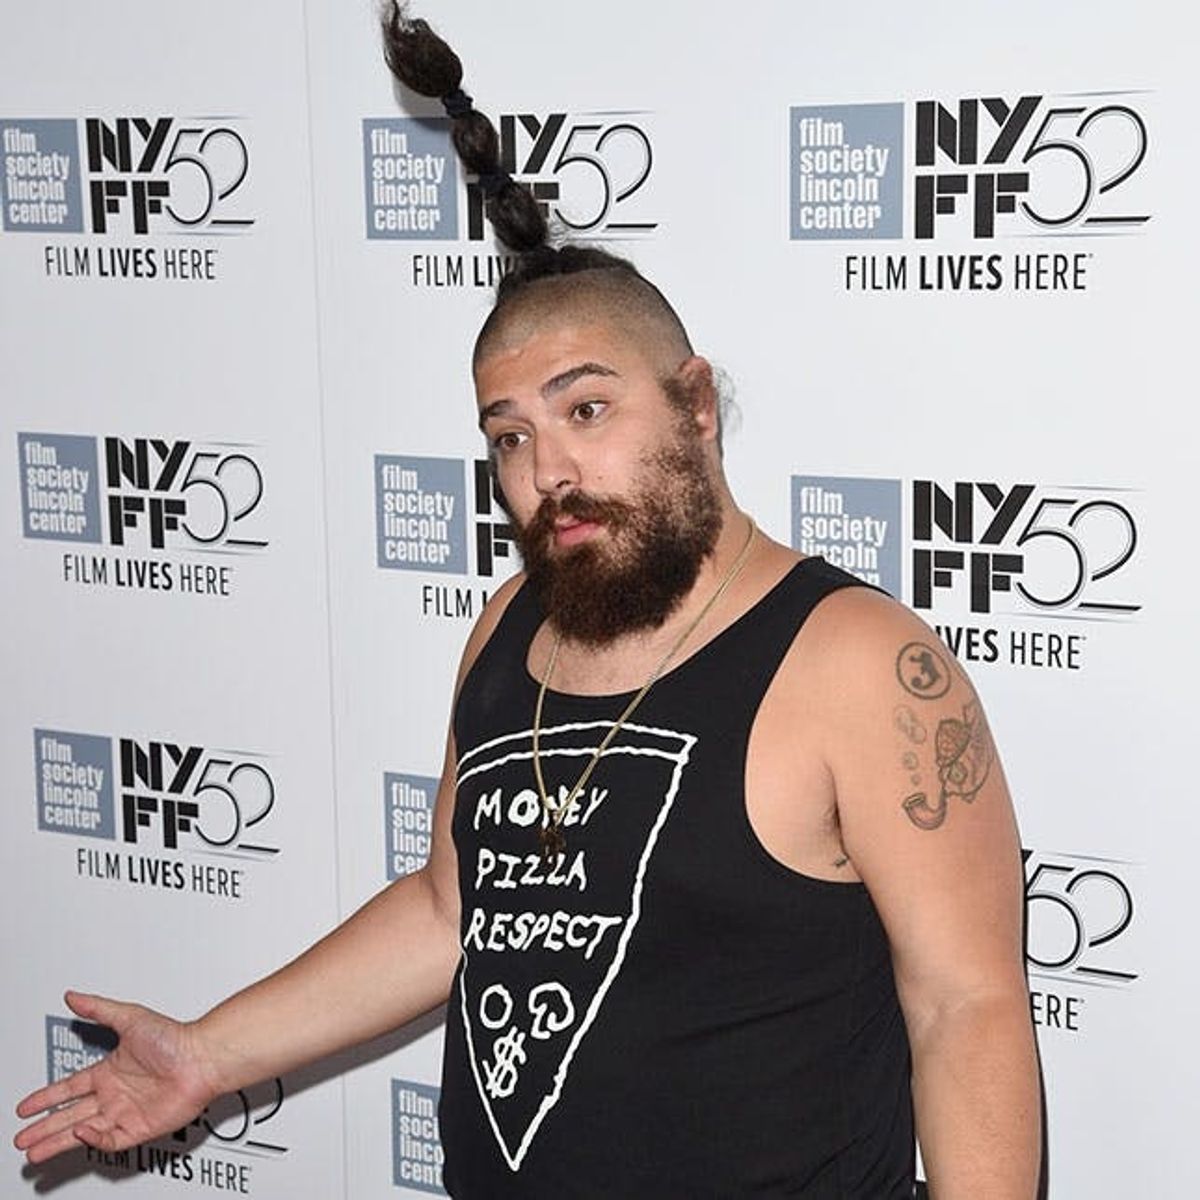 What? Lauren Conrad and the Fat Jew Have THIS In Common